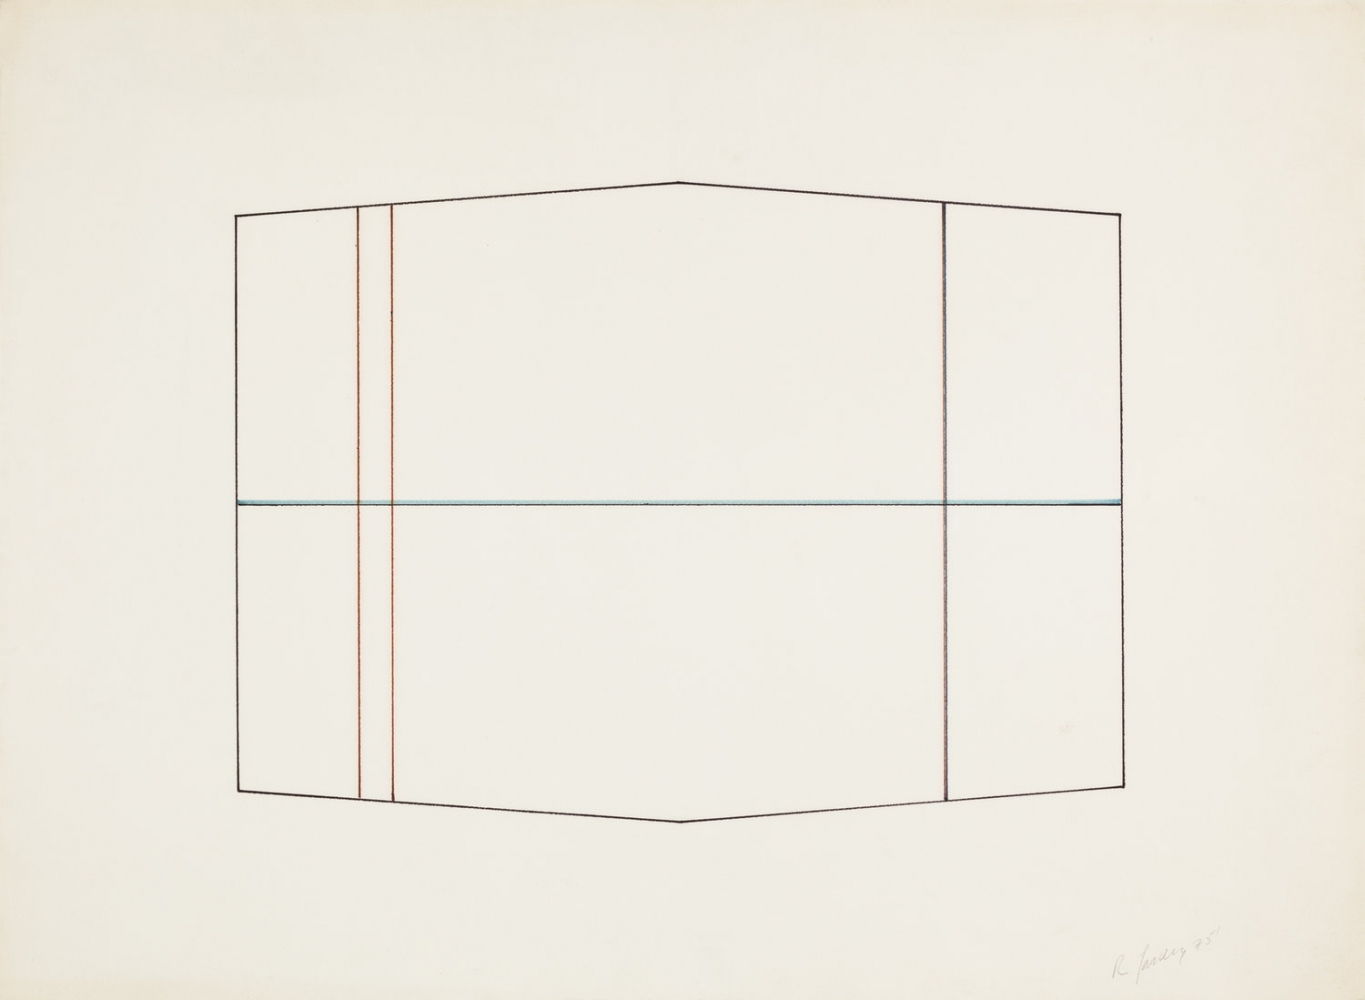 Dickie Landry
Line Drawing 5, 1975
Colored pencil on paper
24 x 32 inches